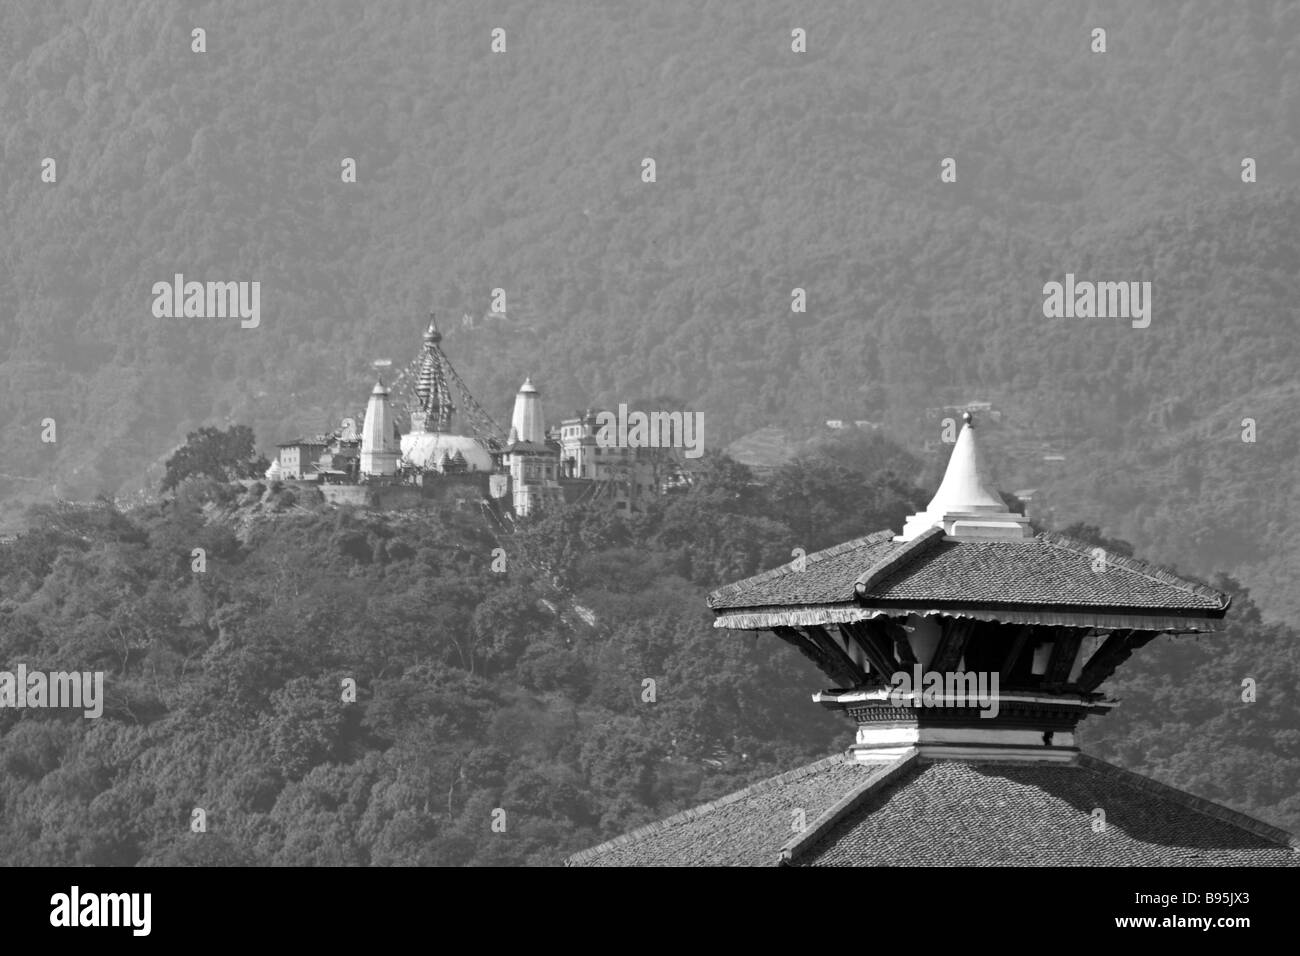 View of an ancient Hindu temple in Durbar Square with Swayambunath temple on a hill in the background, Kathmandu, Nepal Stock Photo